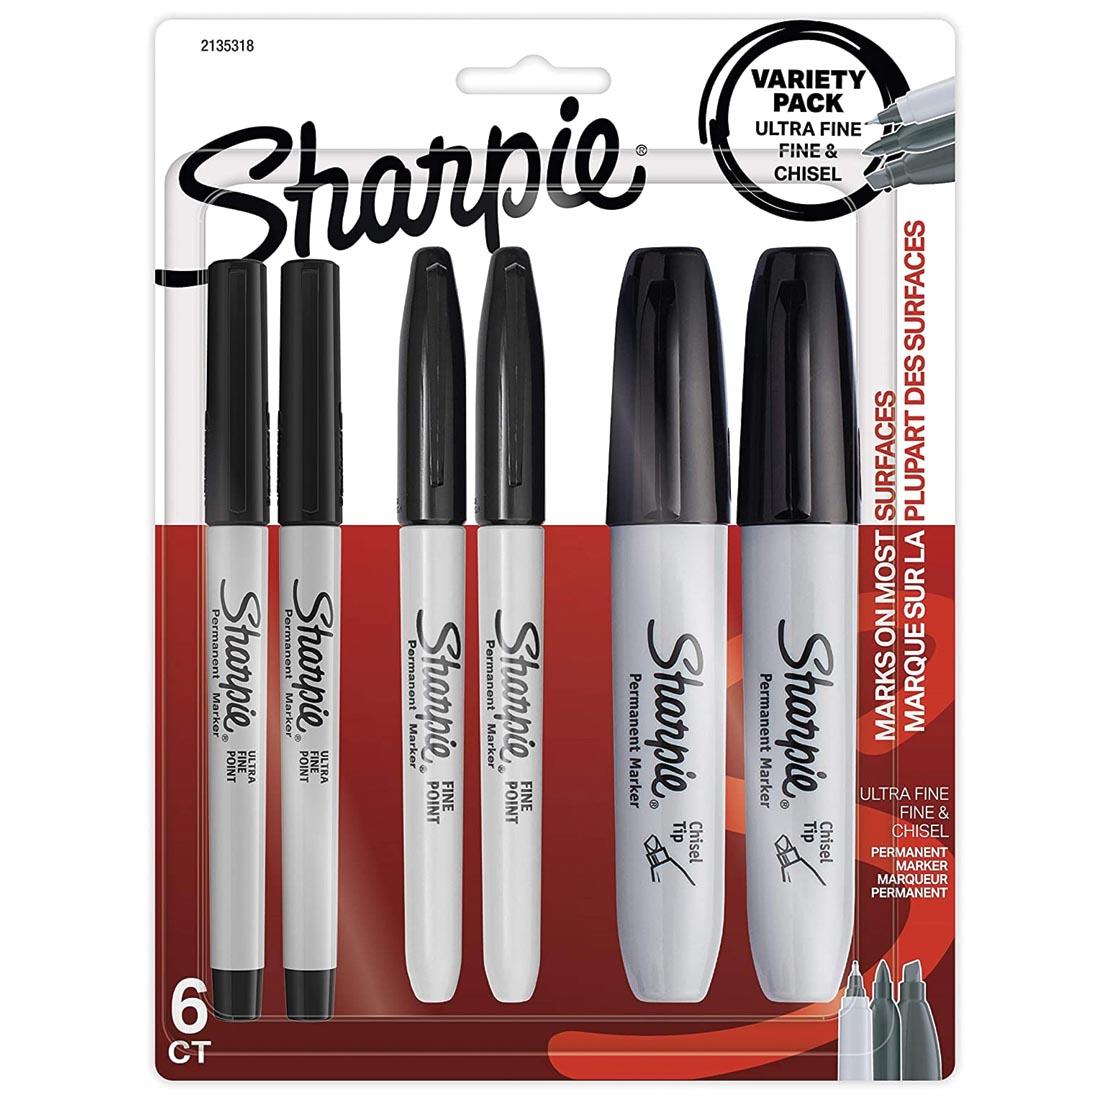 Sharpie Black Permanent Marker 6-Count Variety Pack